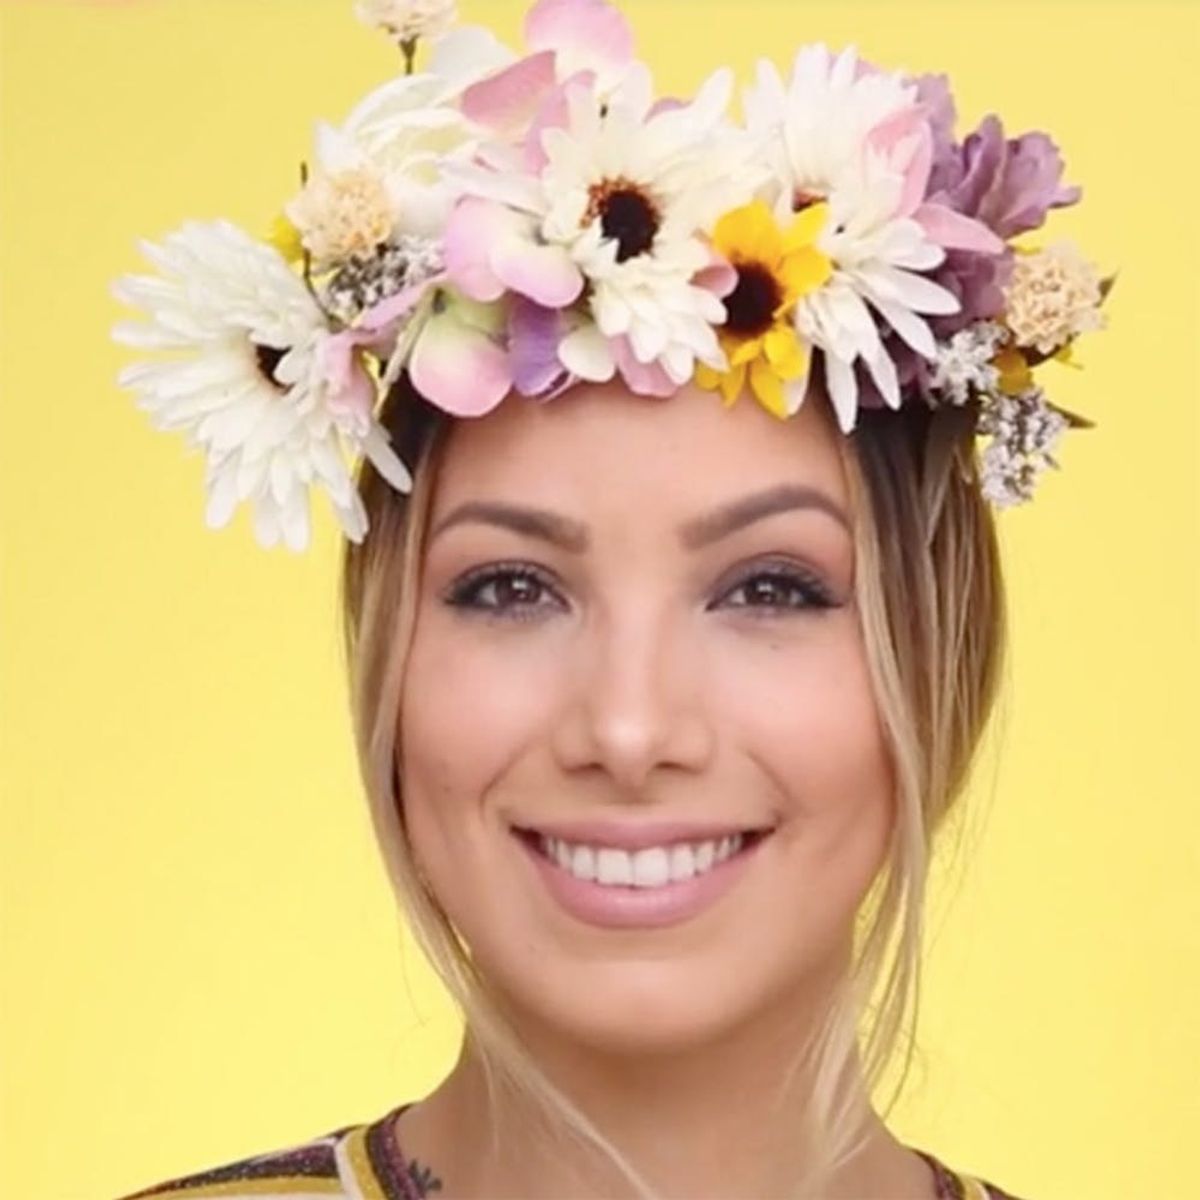 Bring the Snapchat Flower Crown Filter to Life With This Halloween Costume DIY